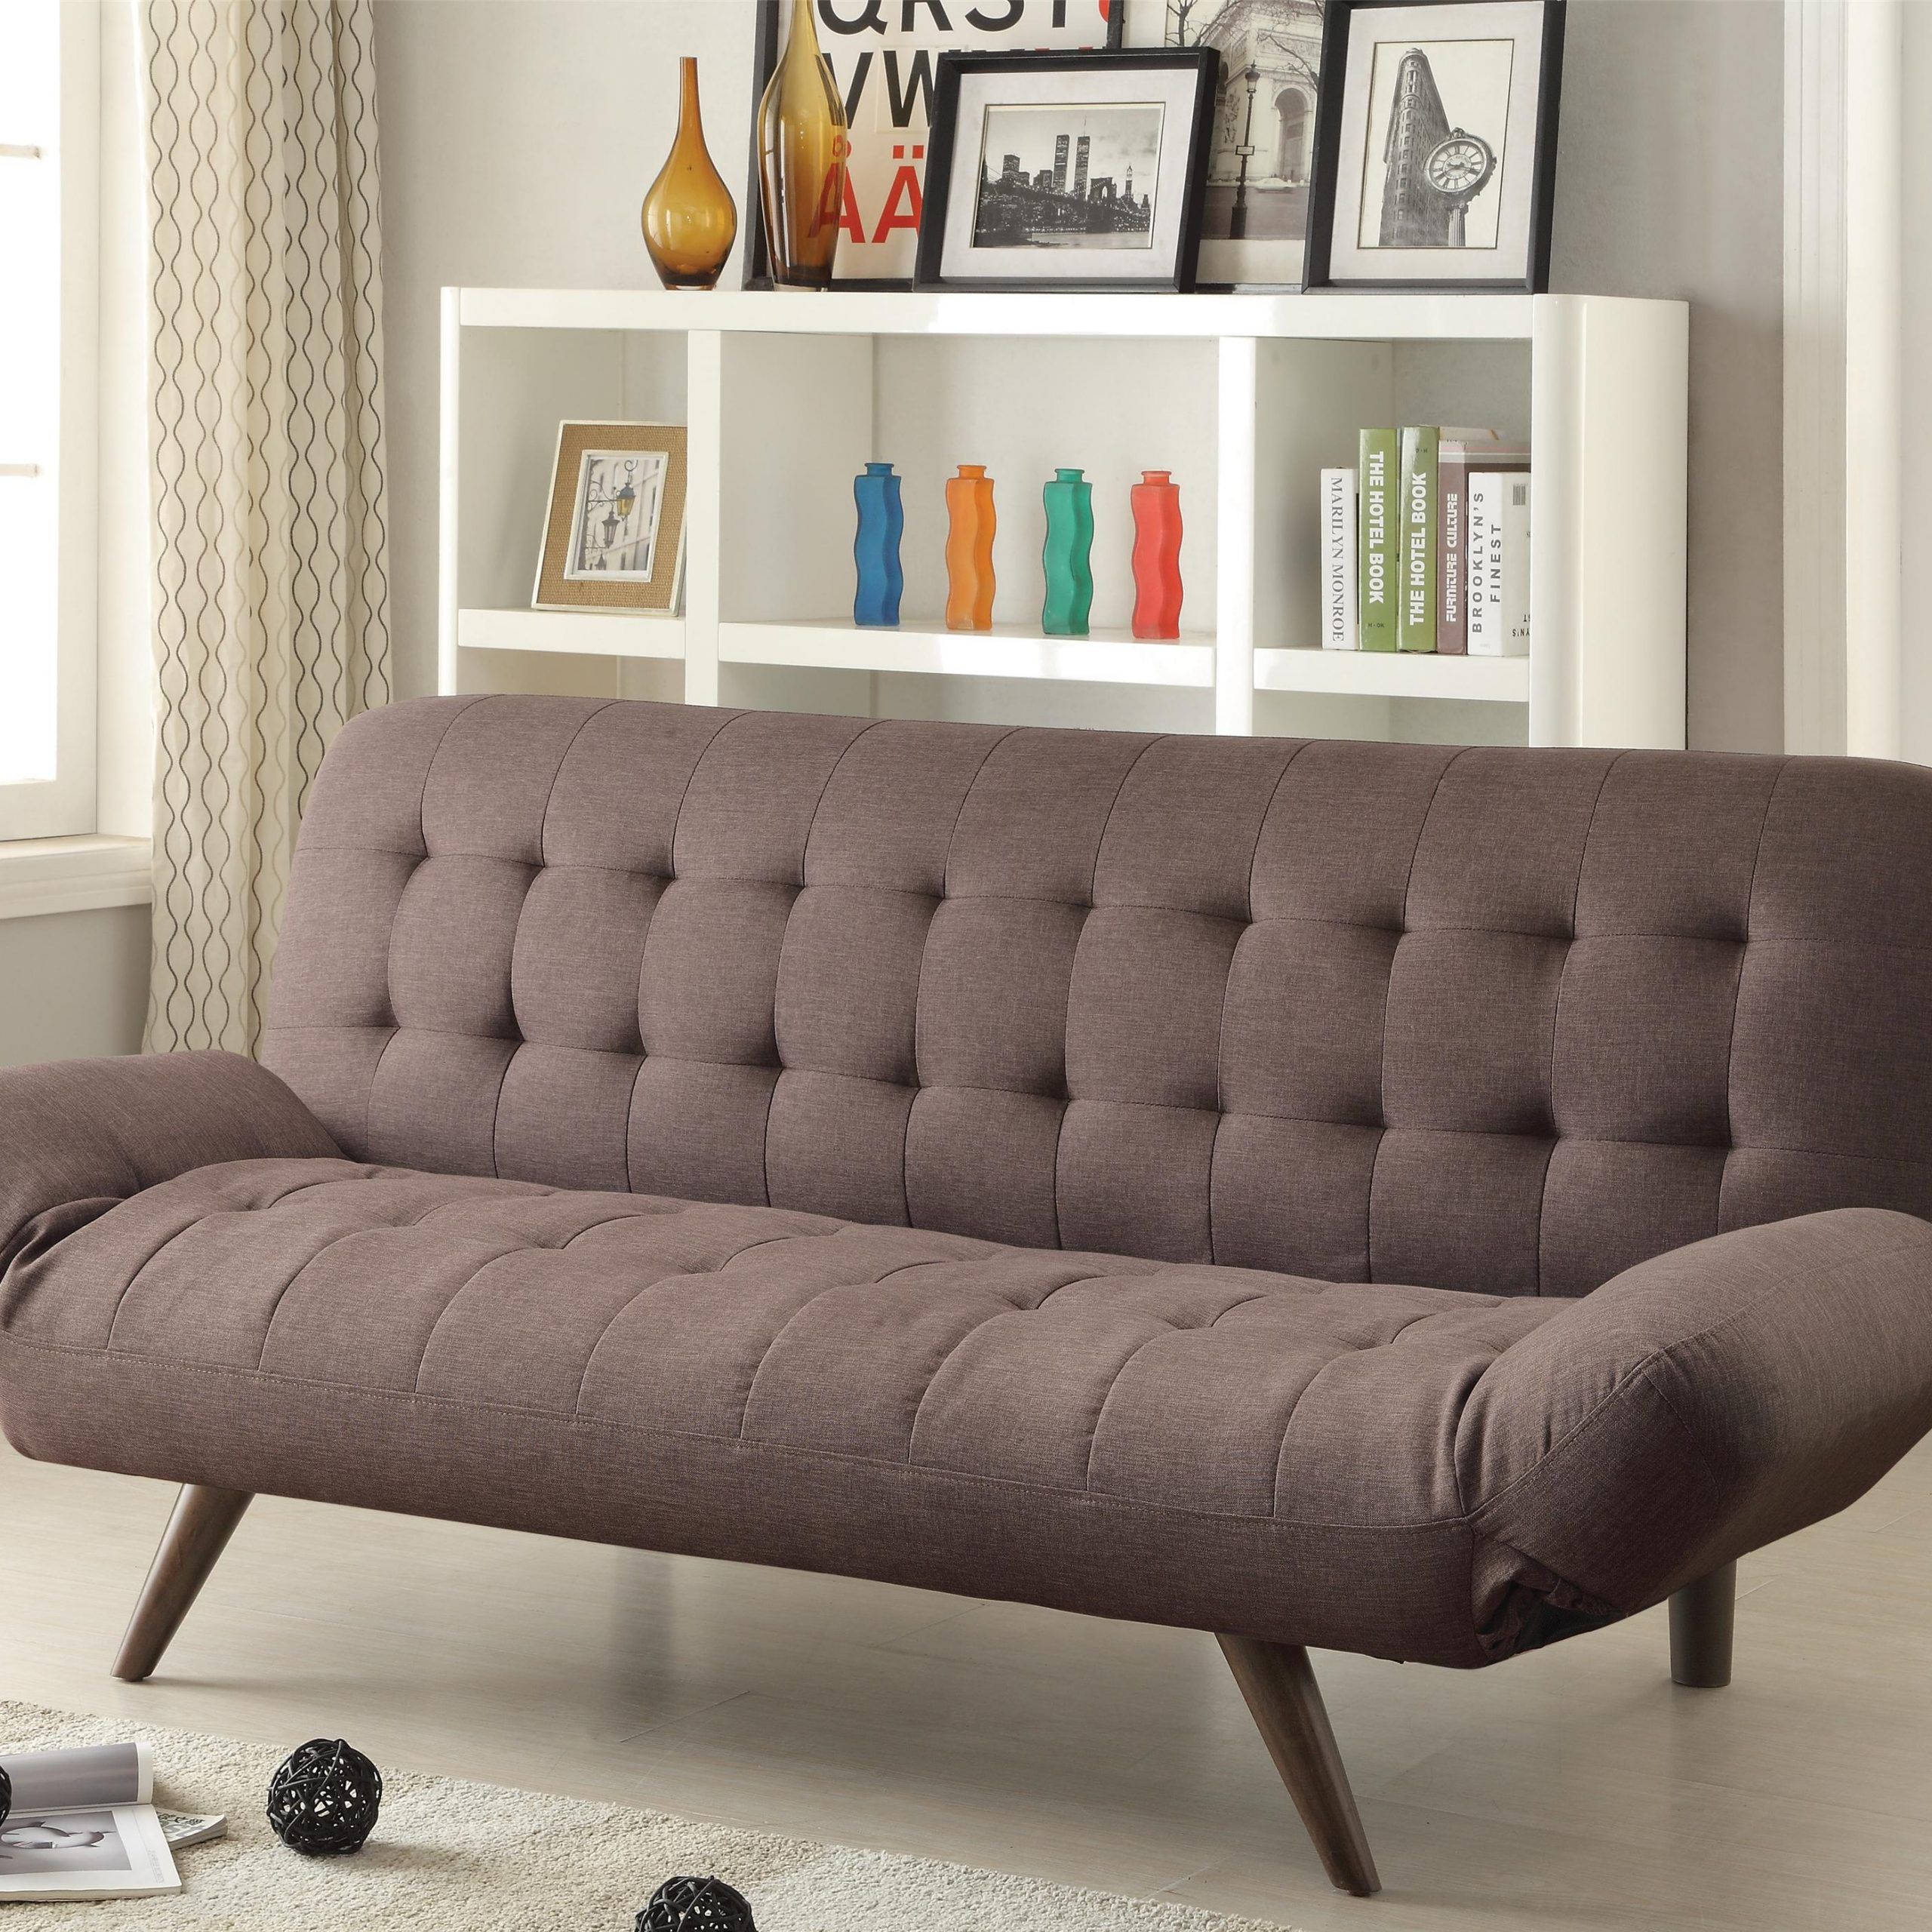 Sofa Beds And Futons Retro Modern Sofa Bed With Tufting With Easton Small Space Sectional Futon Sofas (View 8 of 15)